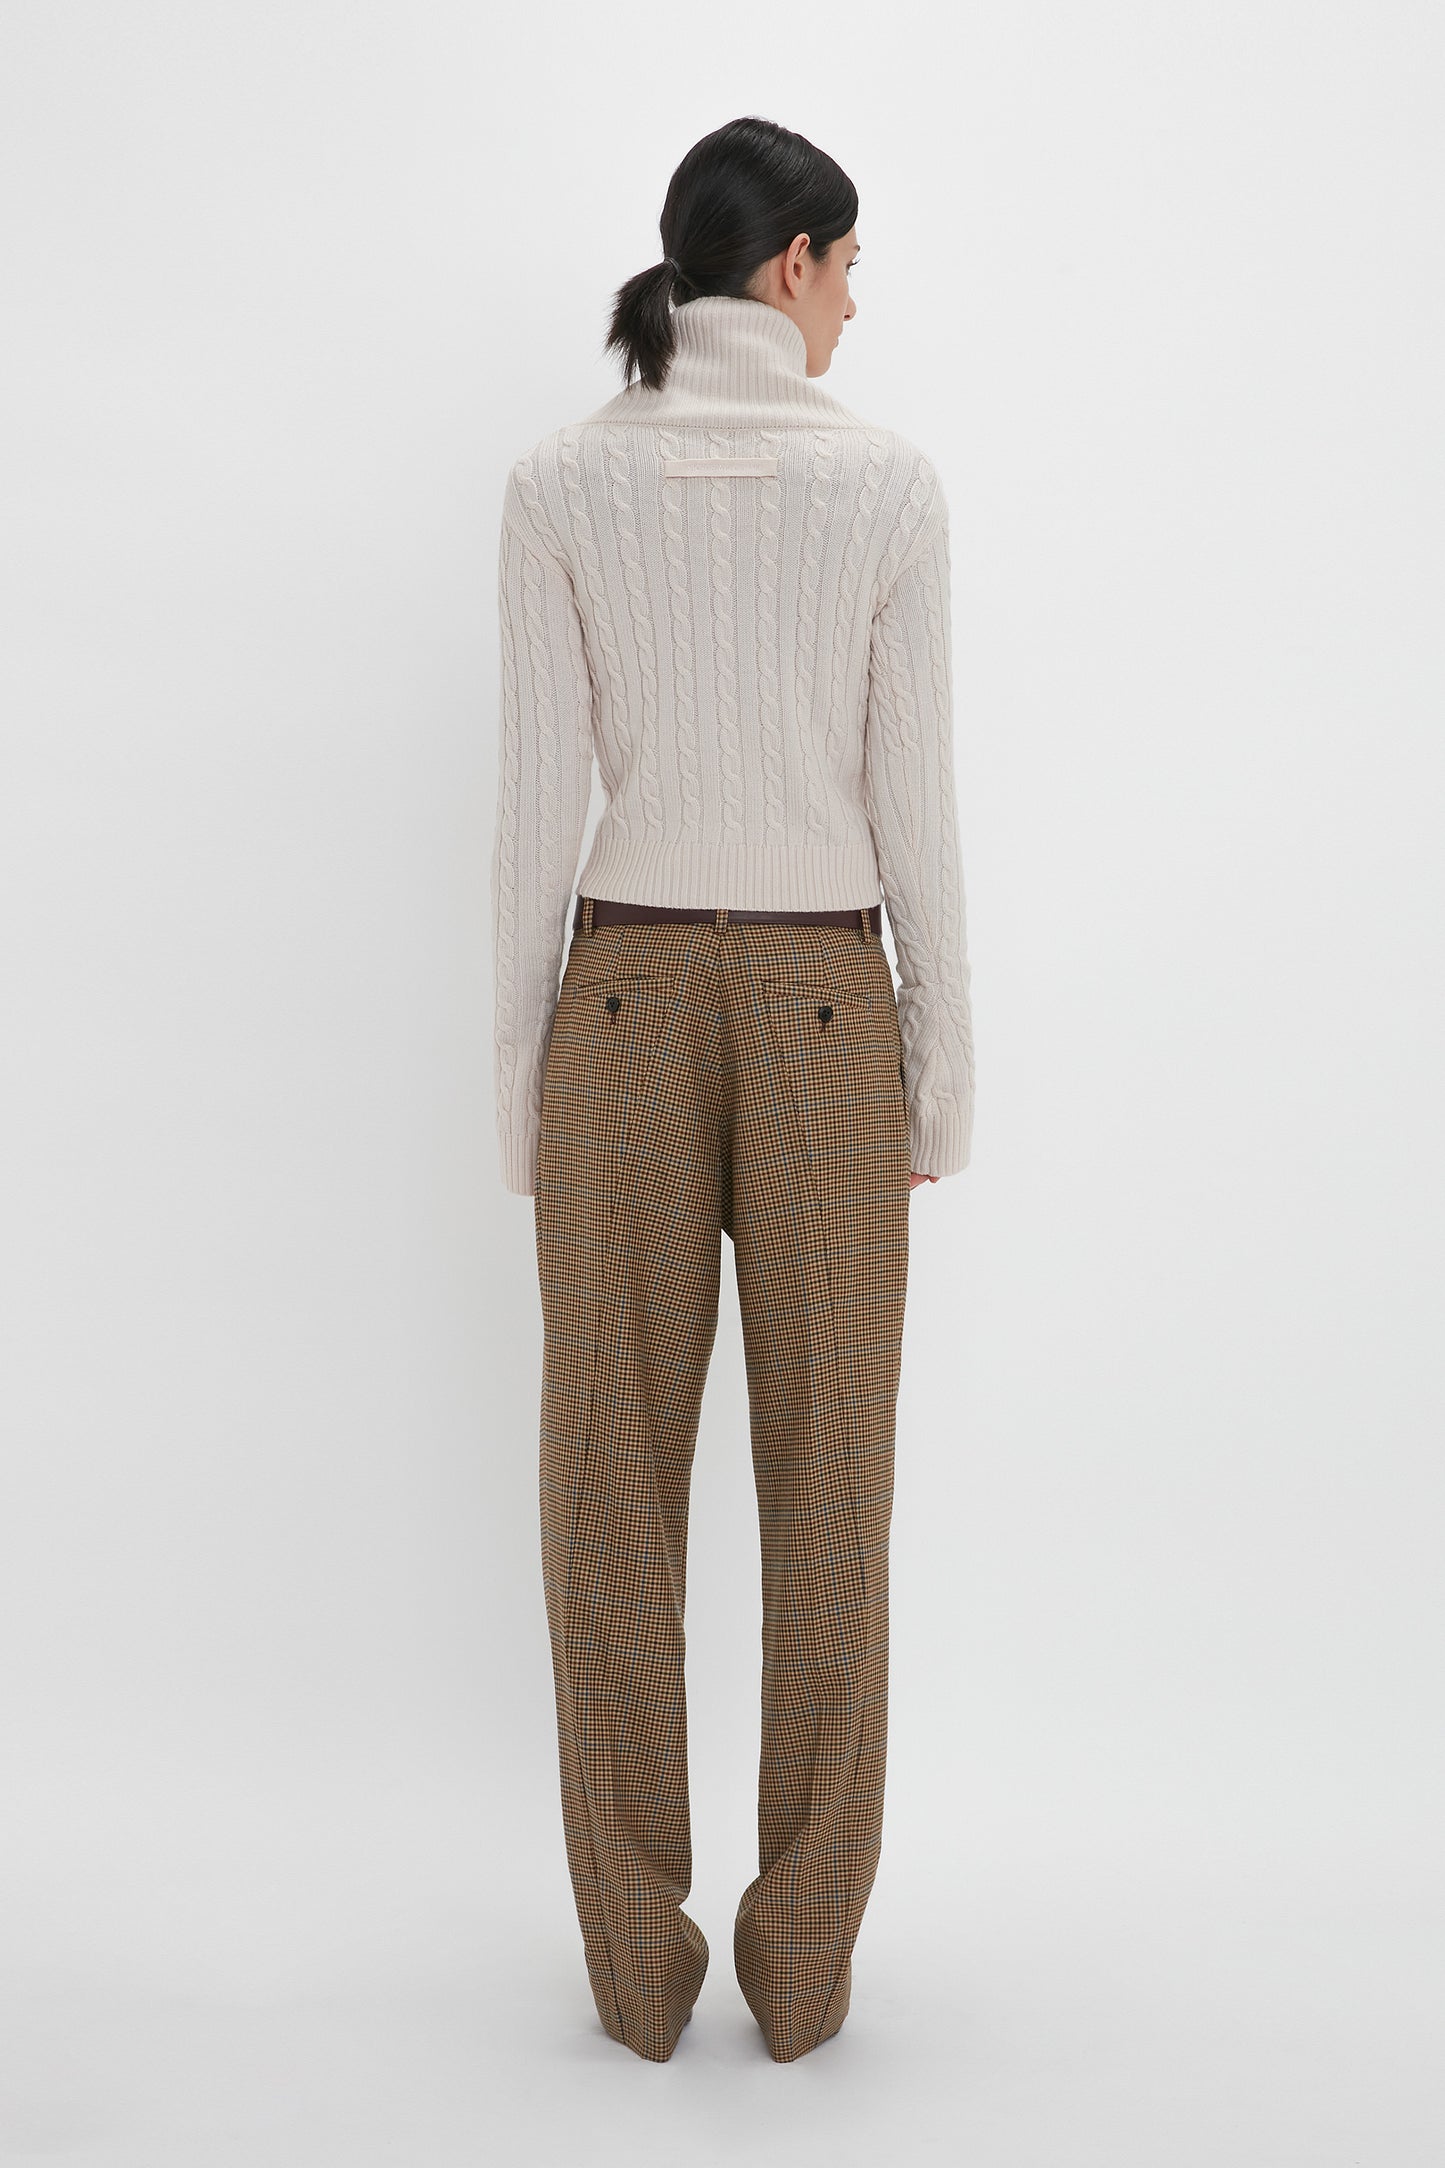 A person wearing a Victoria Beckham Wrap Detail Jumper In Bone and plaid trousers, facing away from the camera, stands against a plain white background.